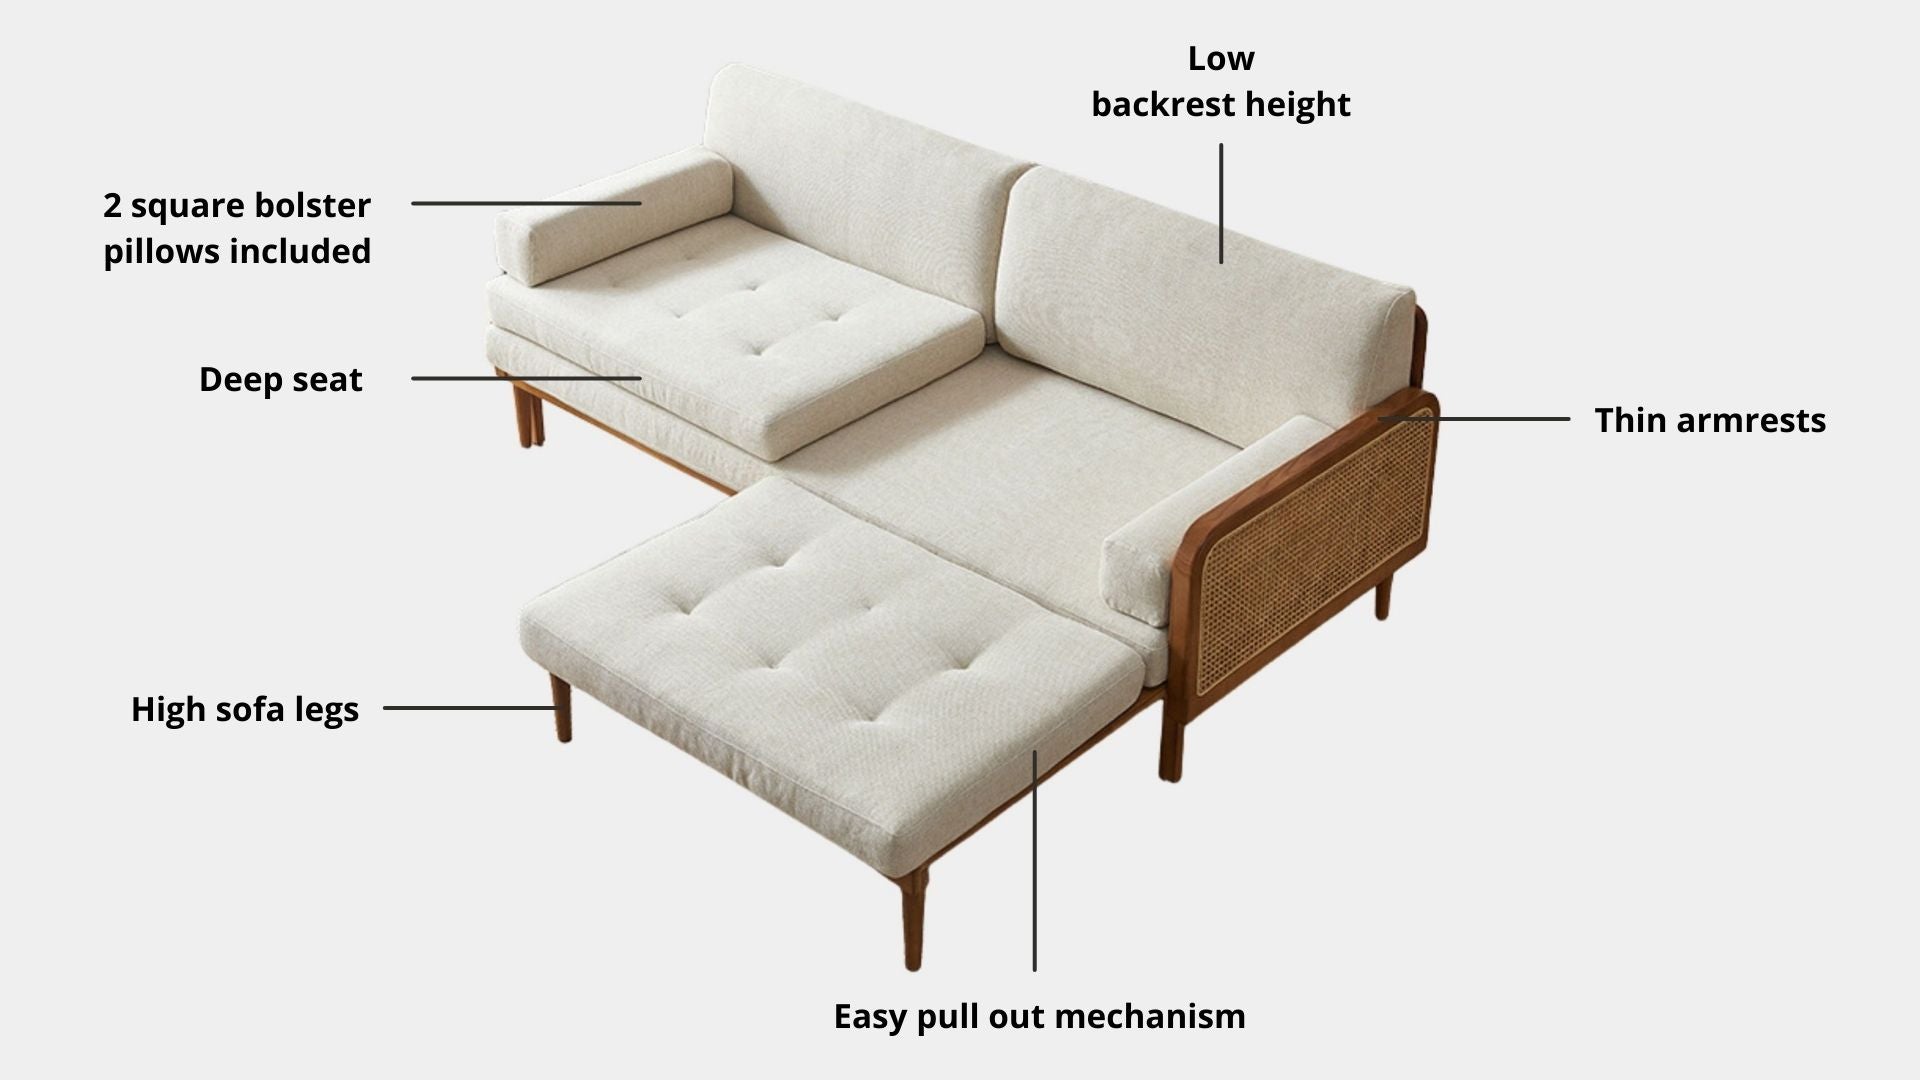 Key features such as armrest thickness, cushion height, seat depth and sofa leg height for Cane Fabric Sofa Bed